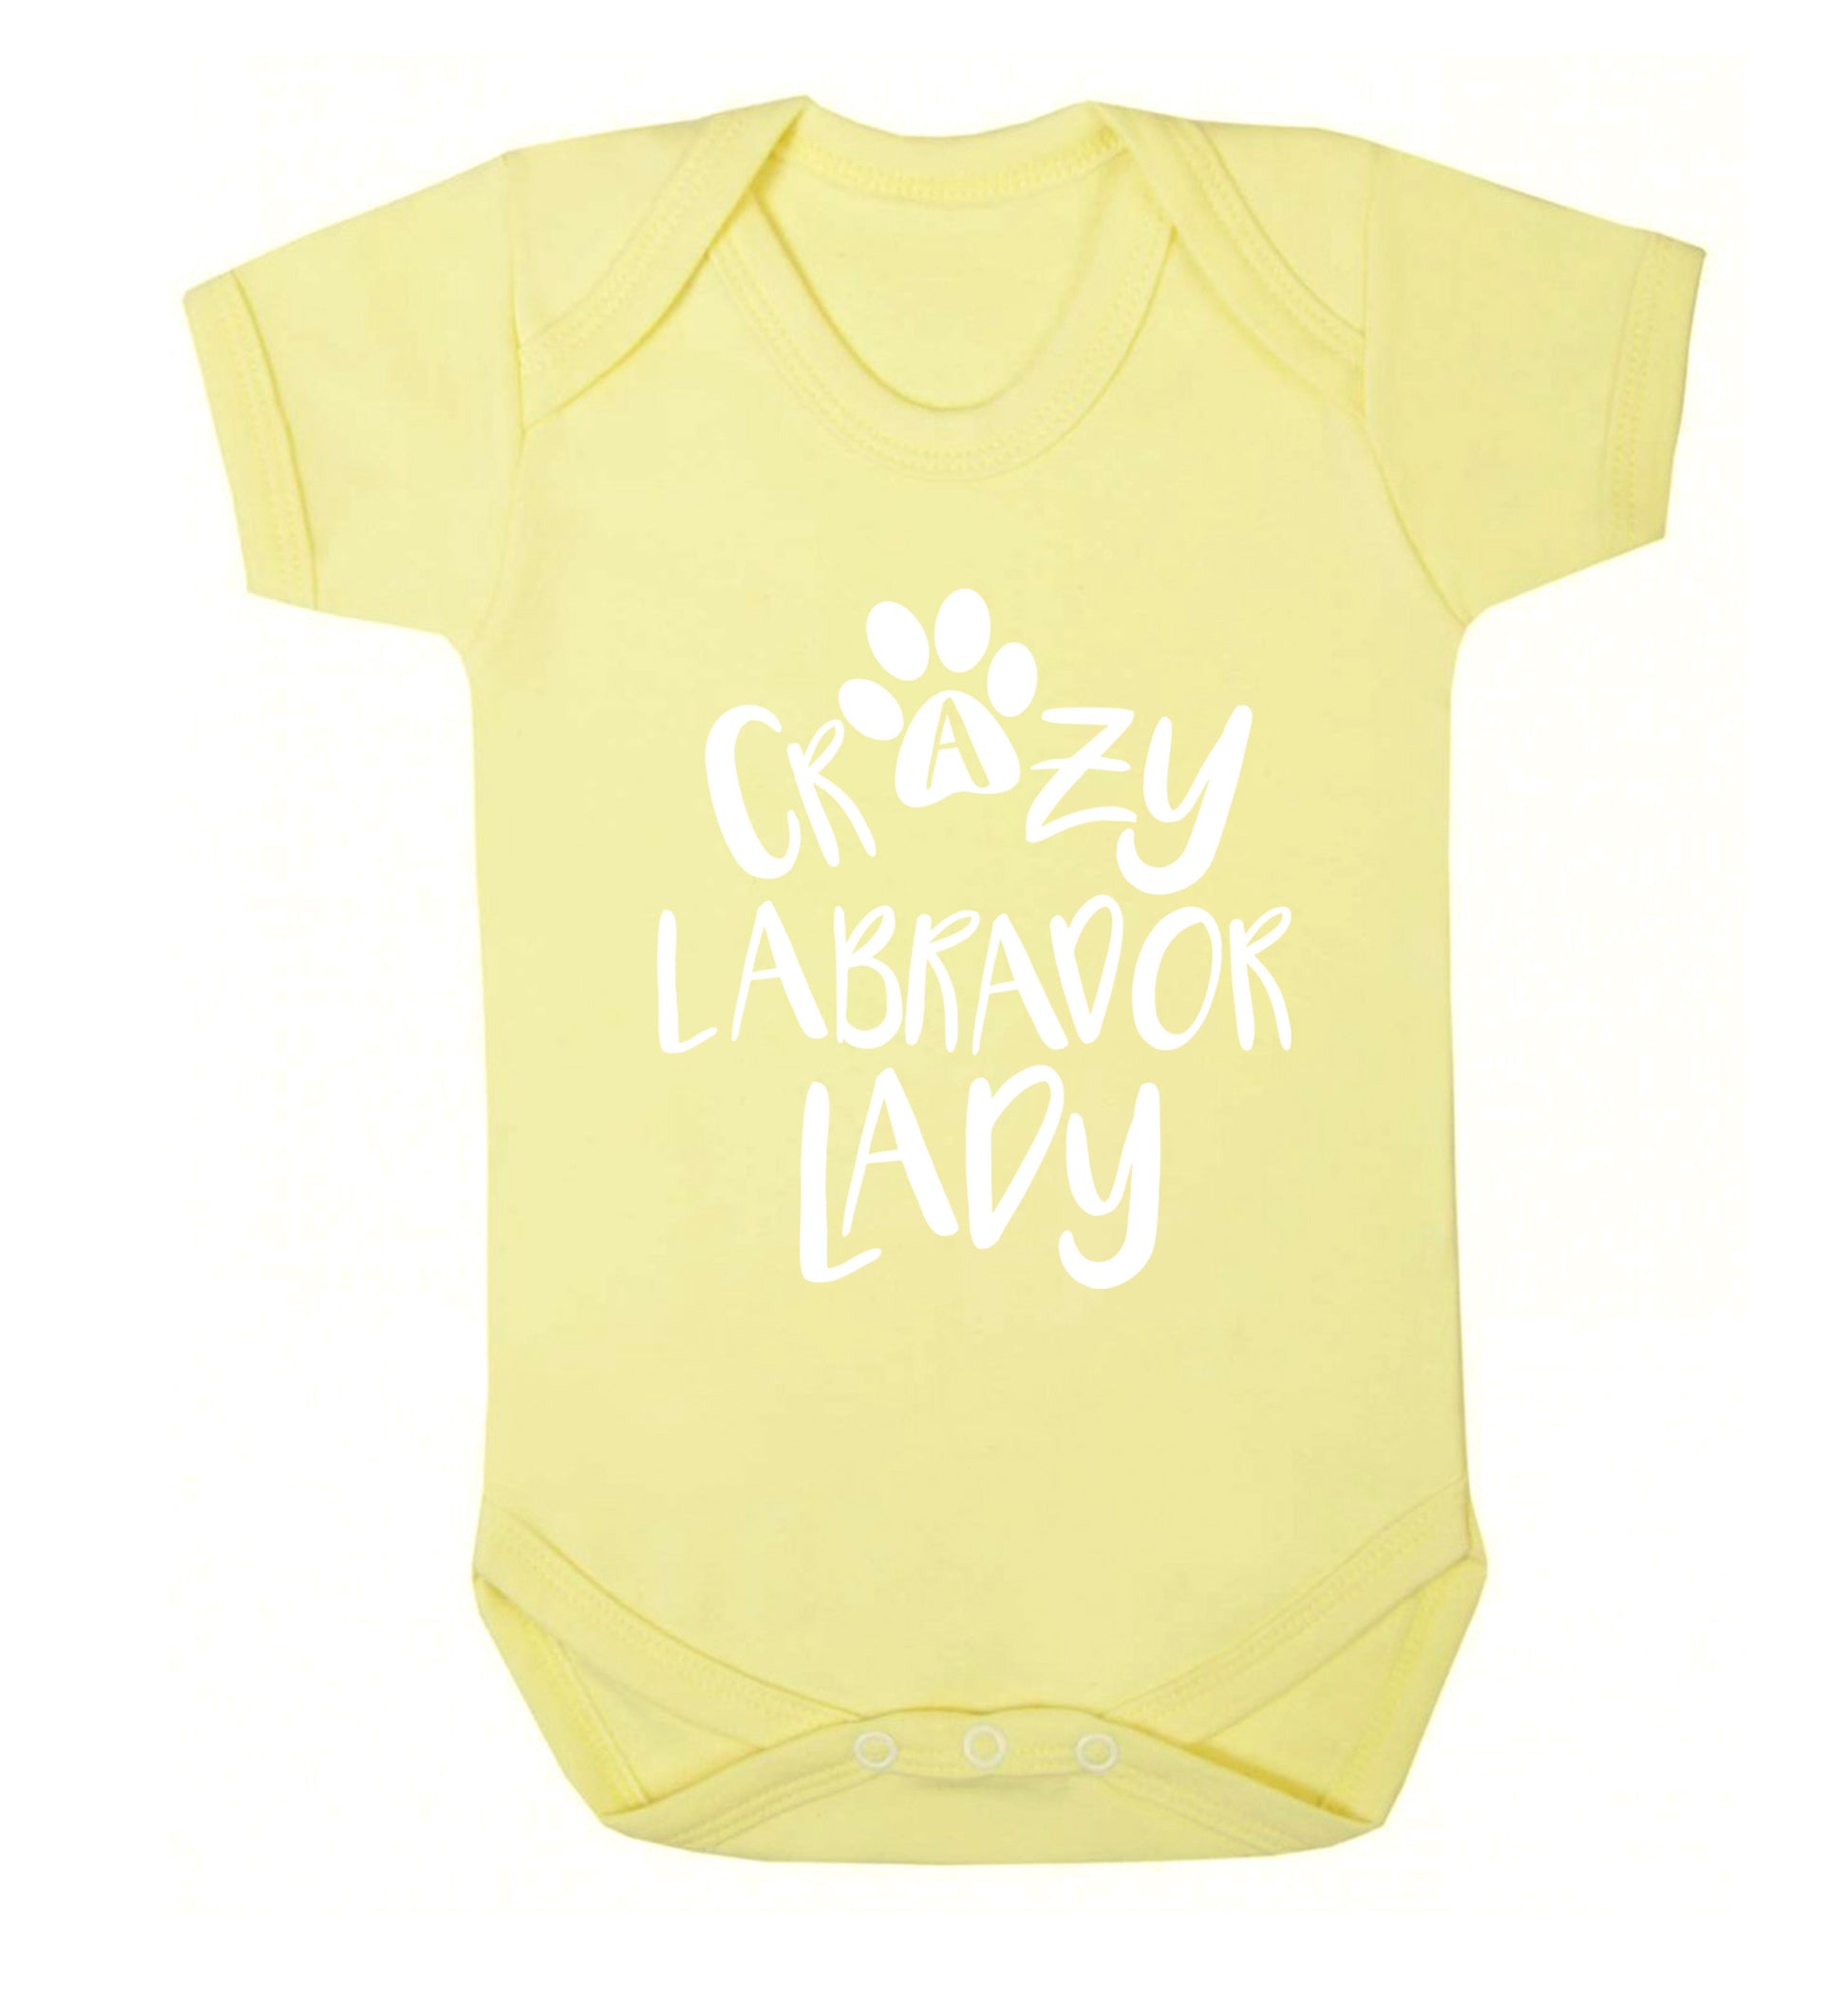 Crazy labrador lady Baby Vest pale yellow 18-24 months